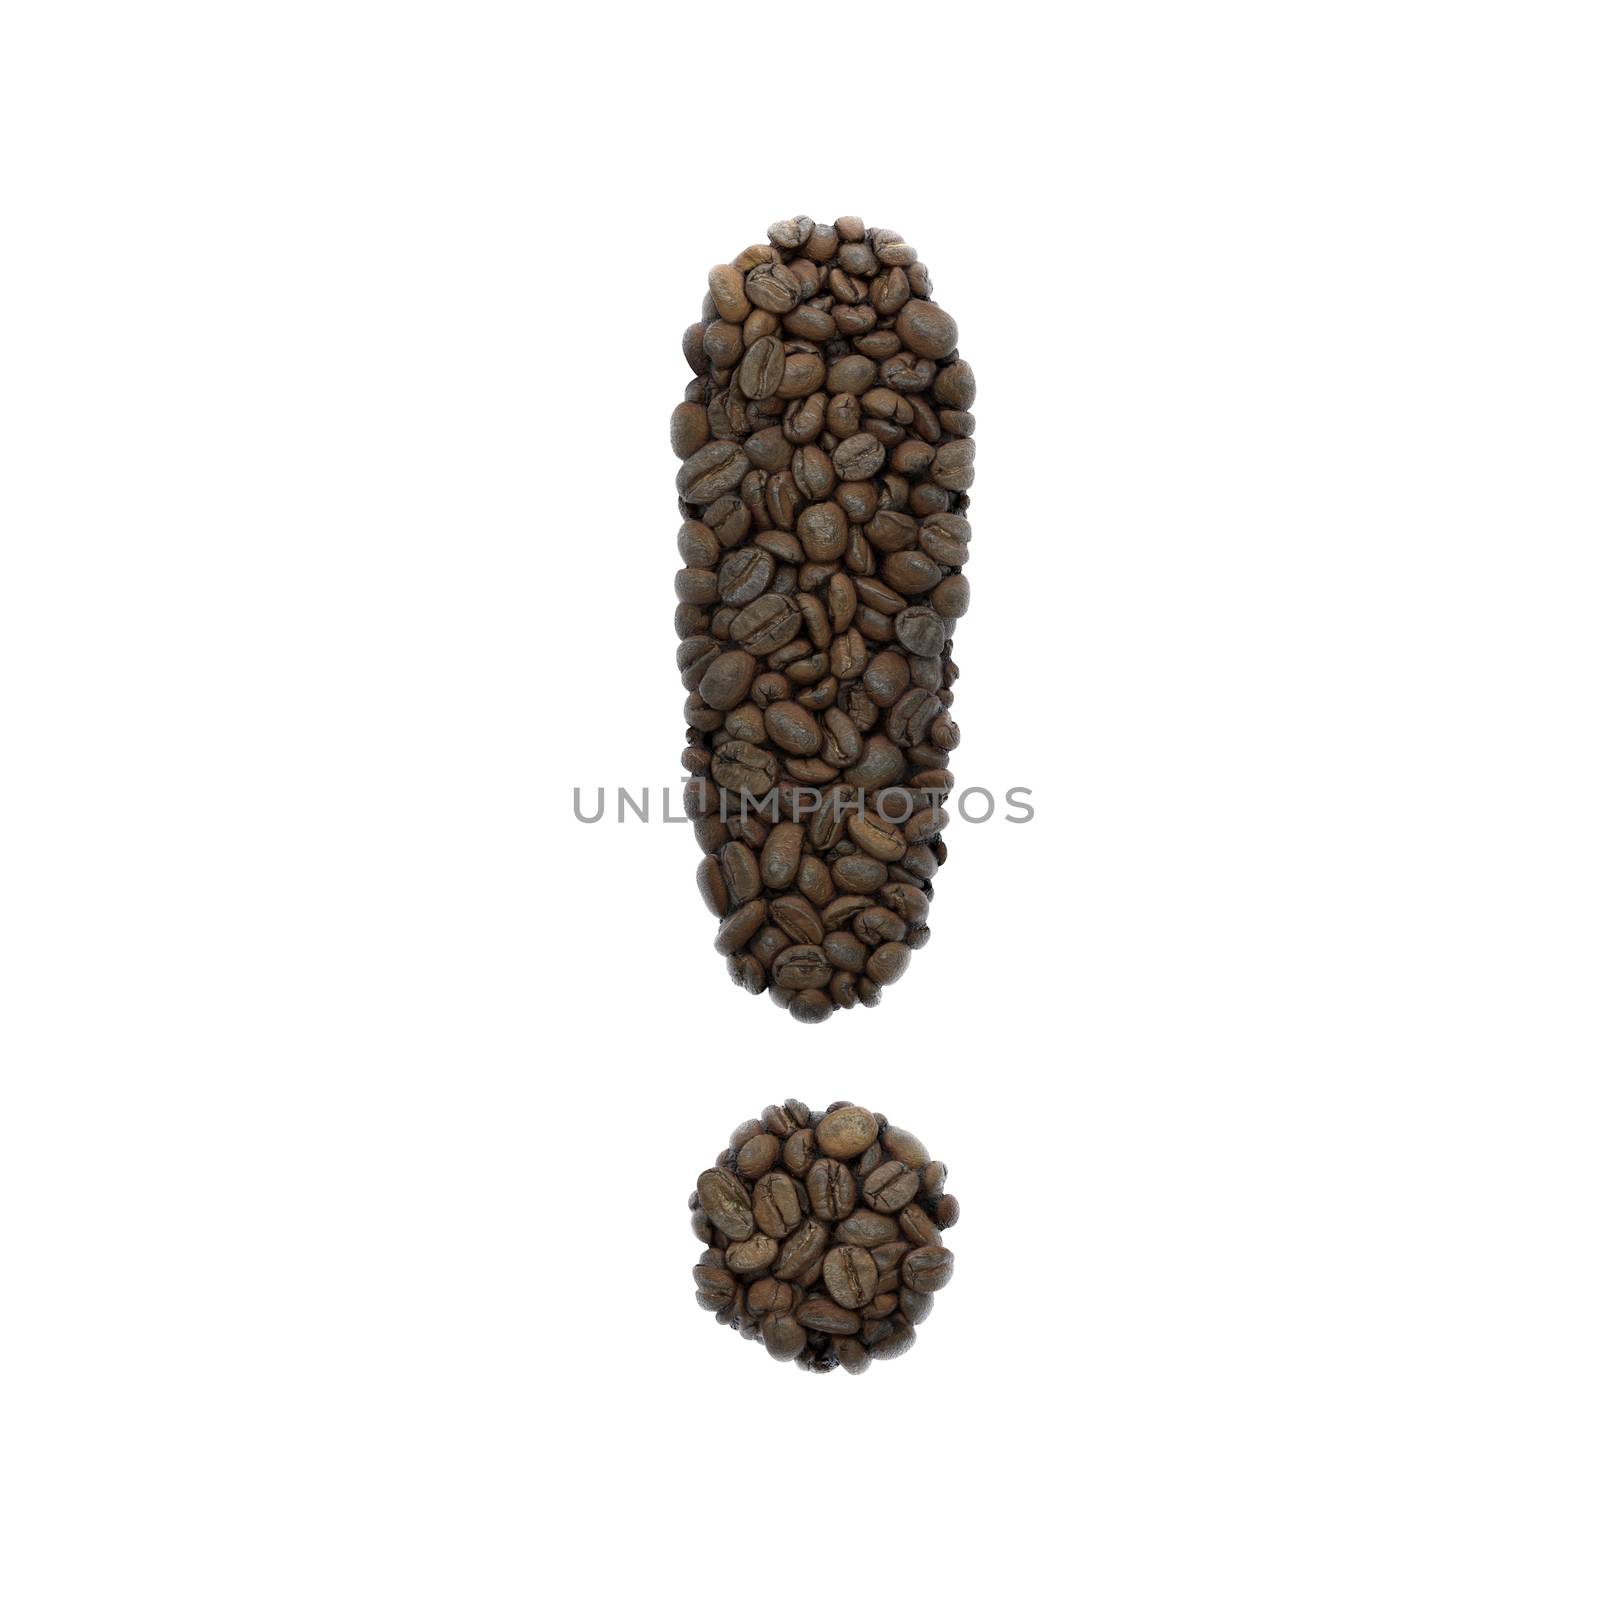 Coffee exclamation point - 3d roasted beans symbol - Suitable for Coffee, energy or insomnia related subjects by chrisroll